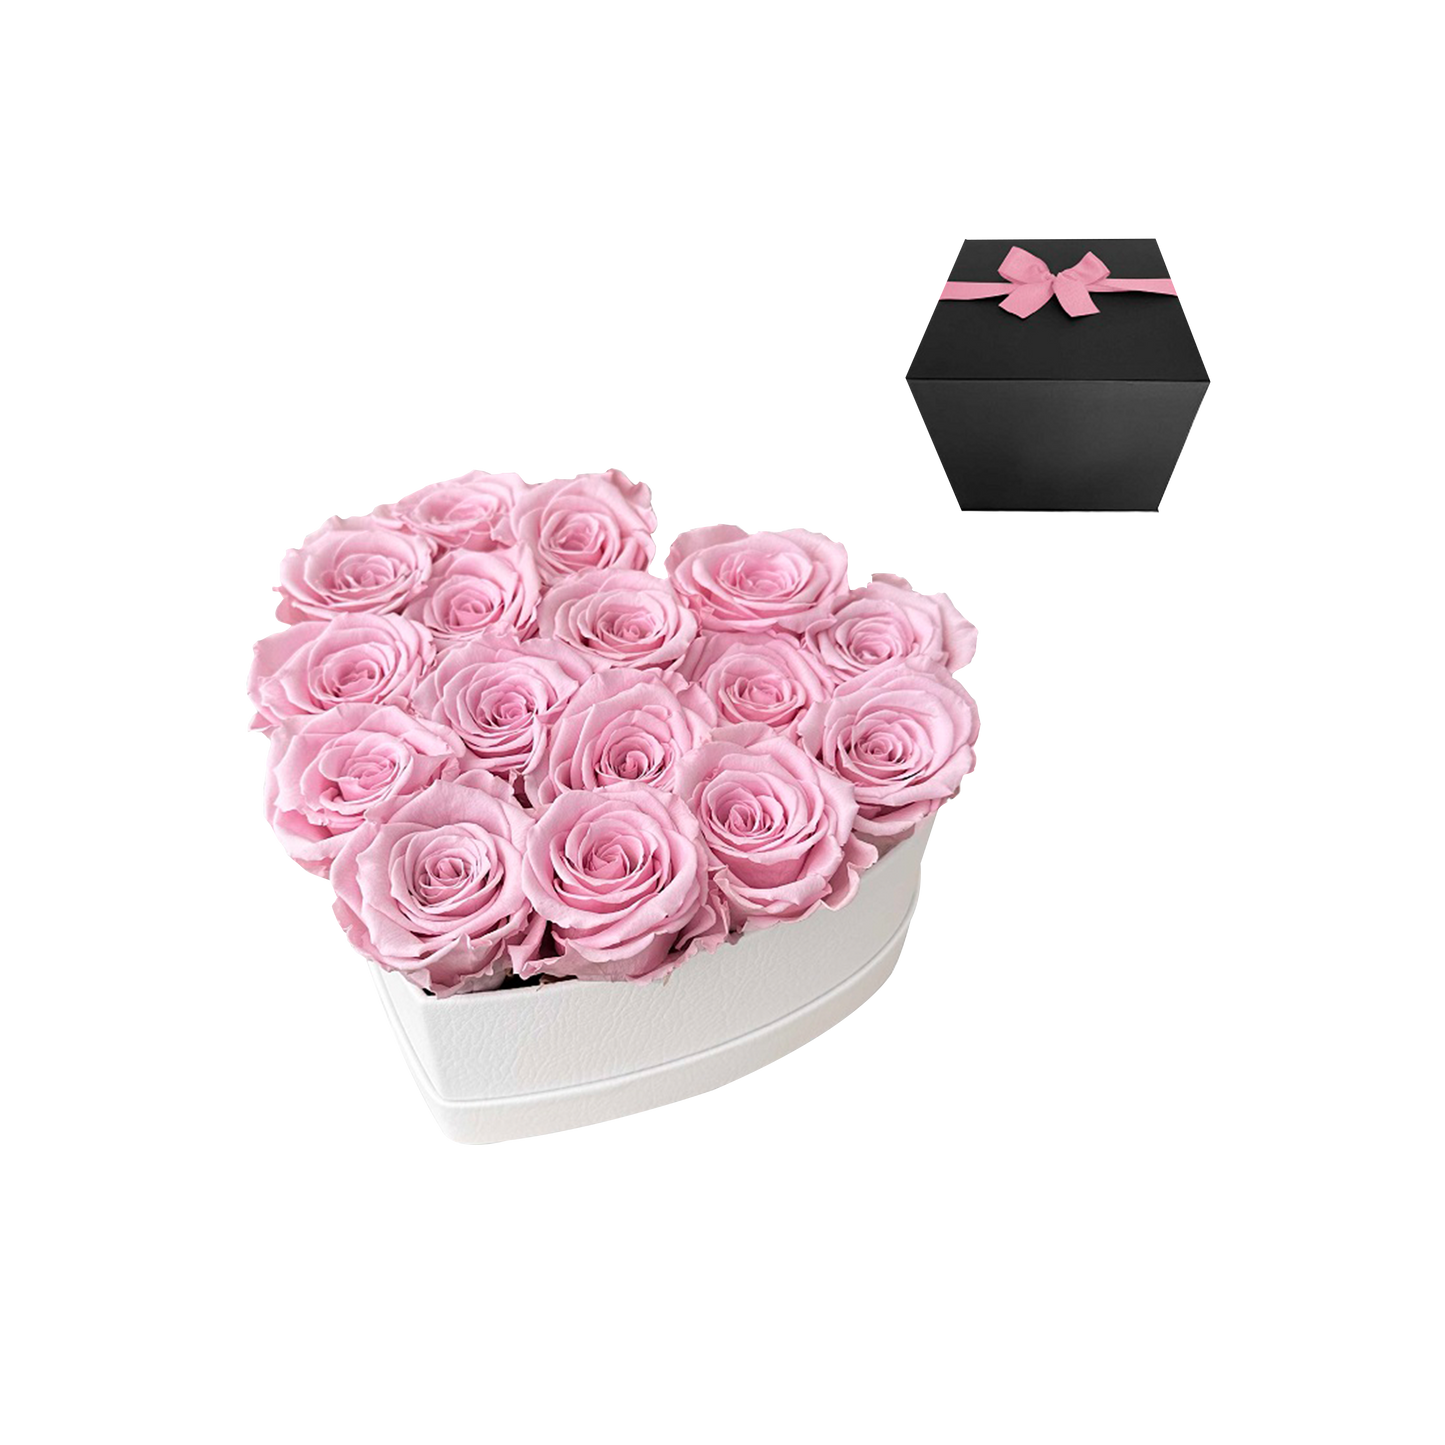 LUXURY 11-13 PRESERVED ROSES ARRANGEMENT - HEART PU LEATHER BOX